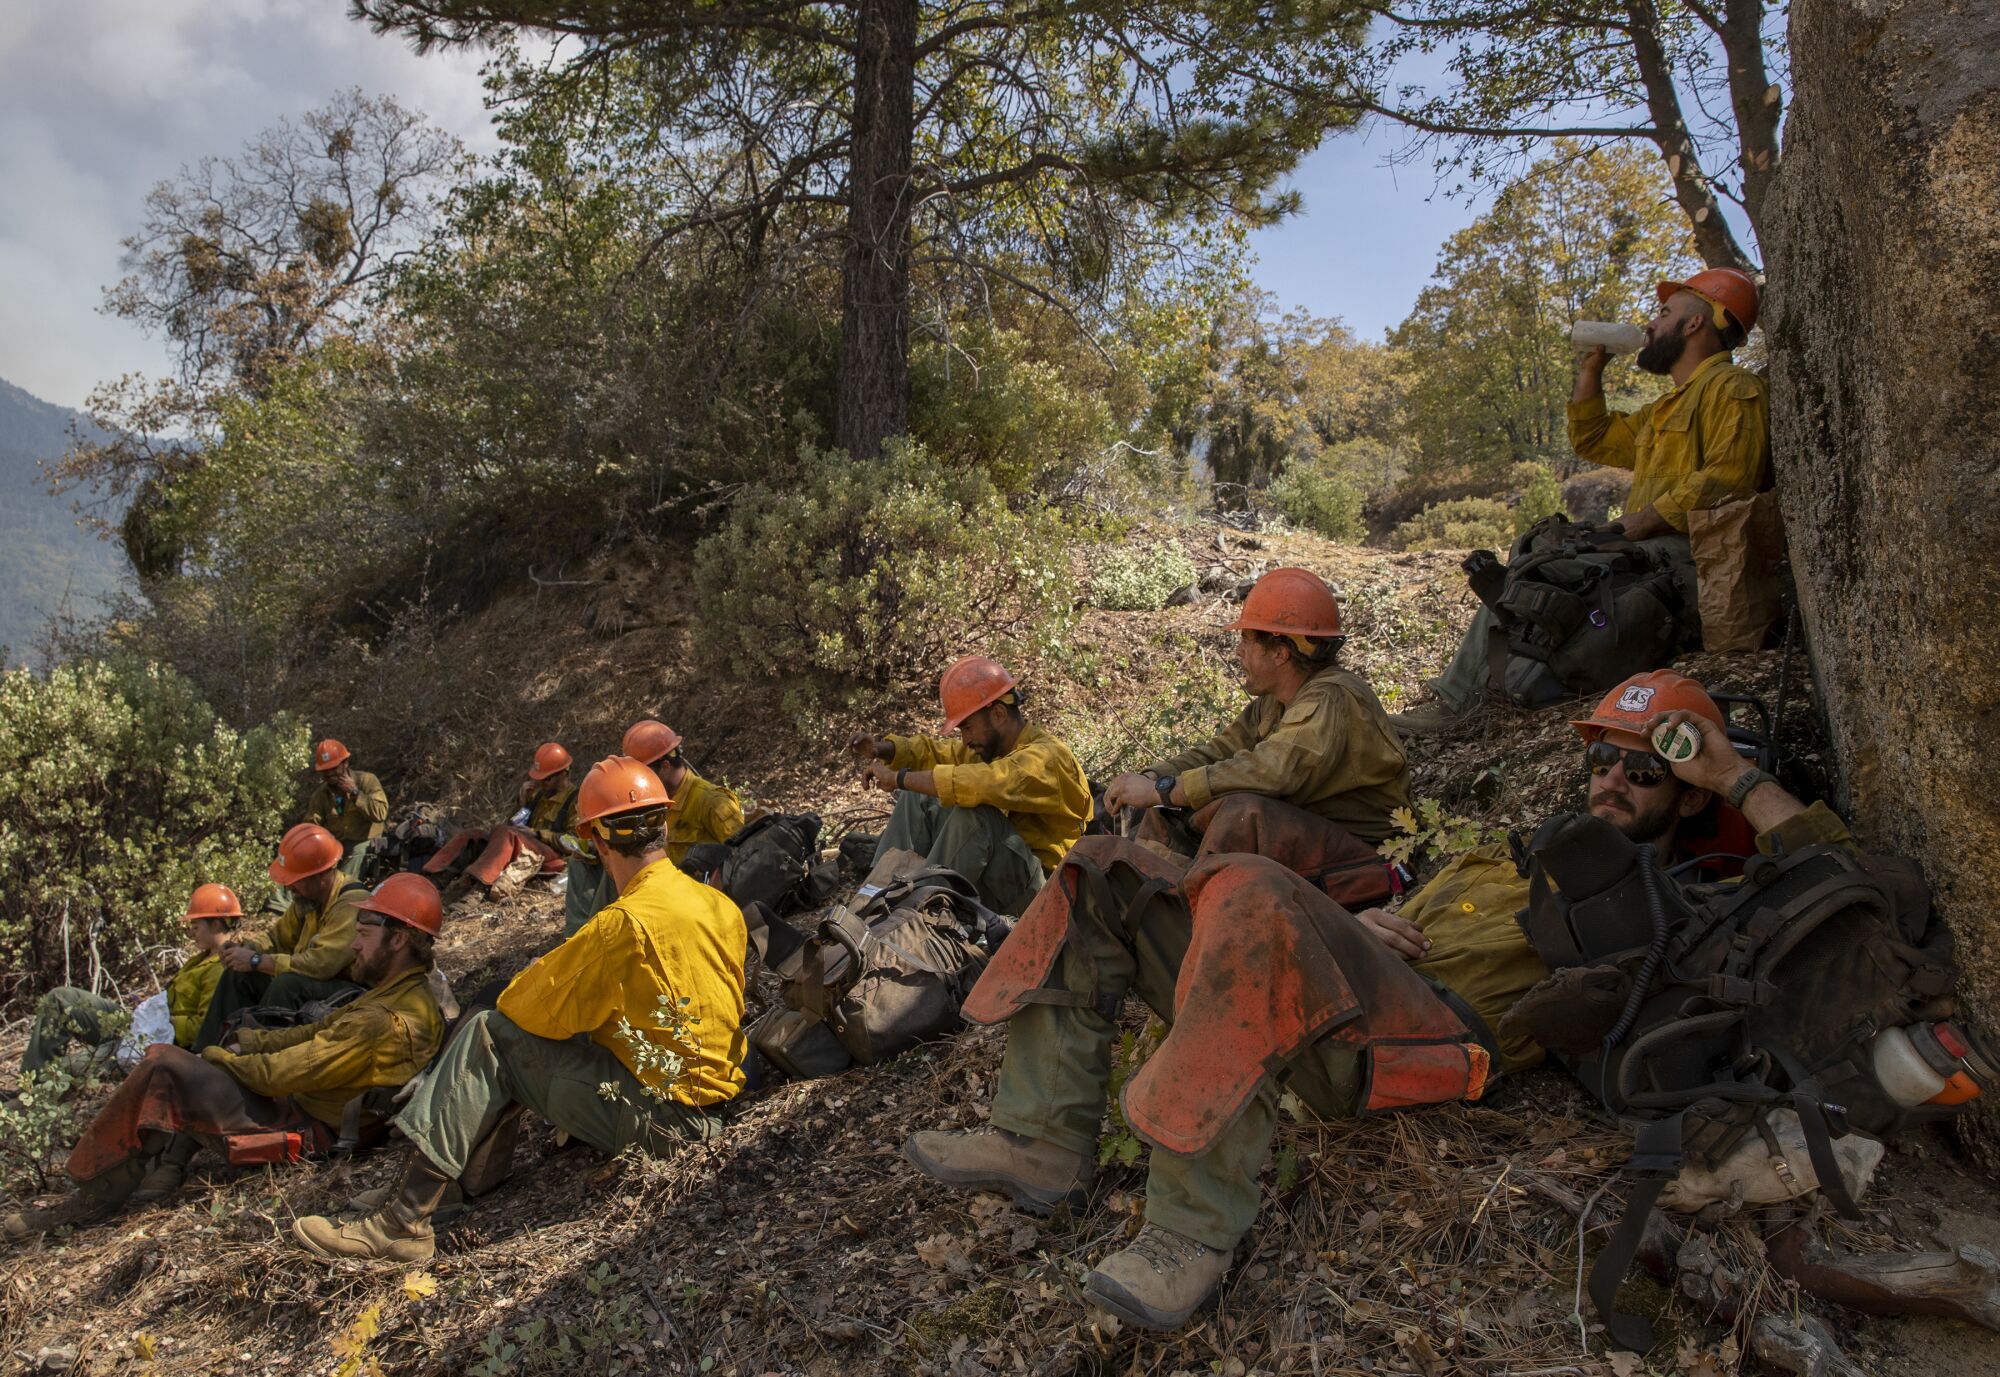 Firefighters rest in the shade of trees